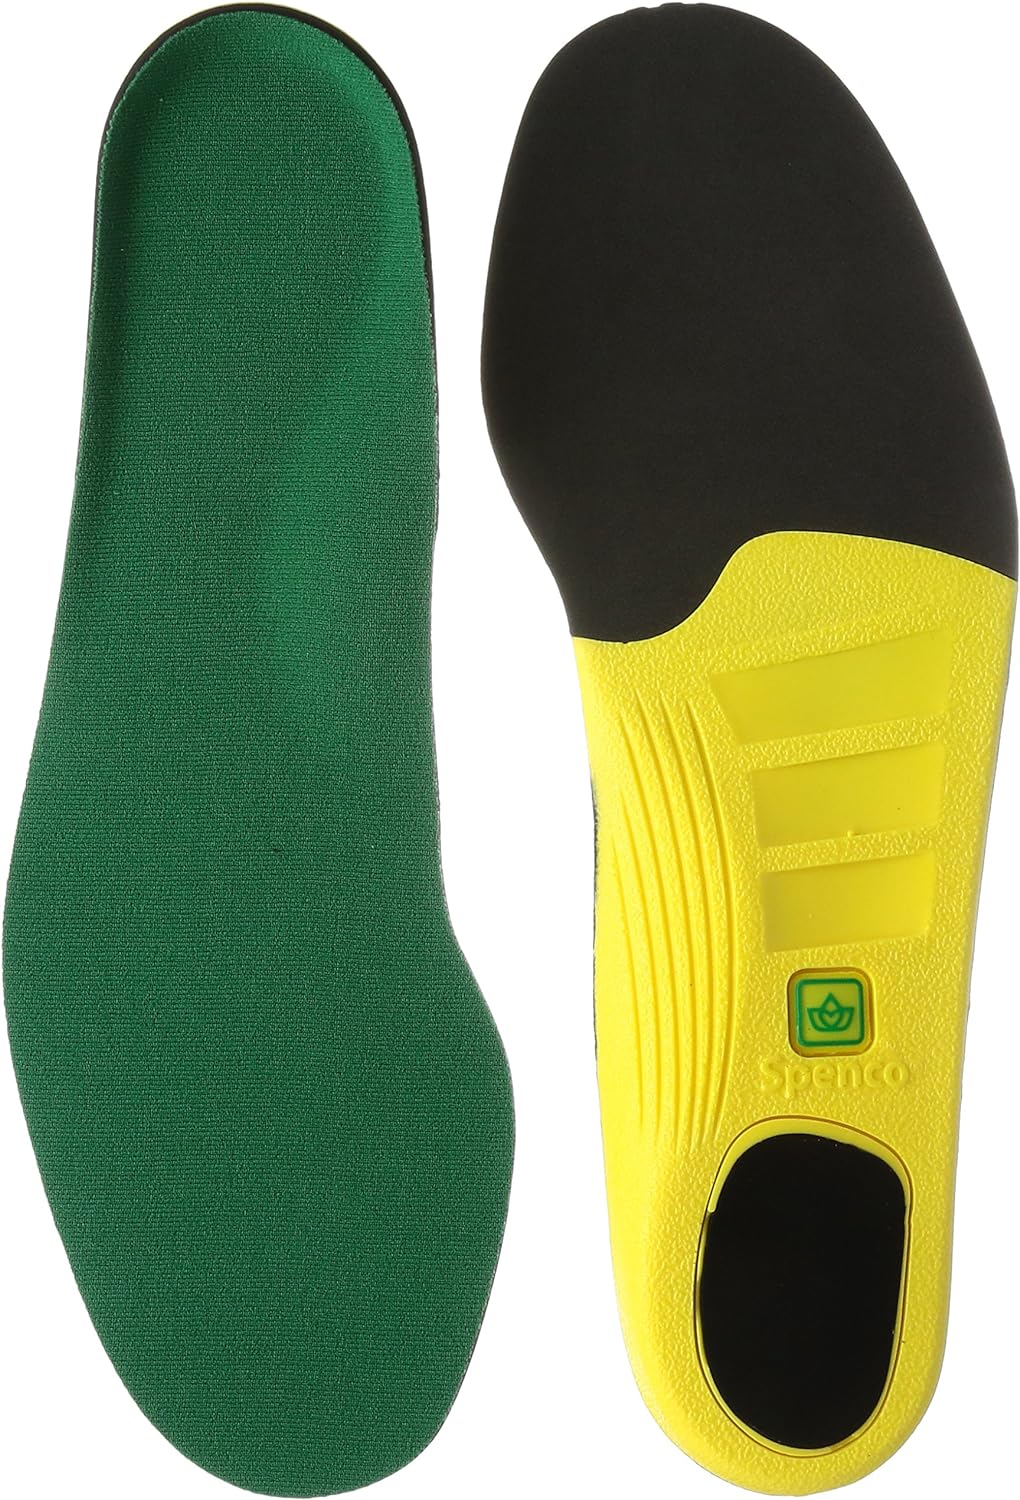 Spenco Polysorb Heavy Duty Maximum All Day Comfort and Support Shoe Insole Womens 11-12.5 / Mens 10-11.5